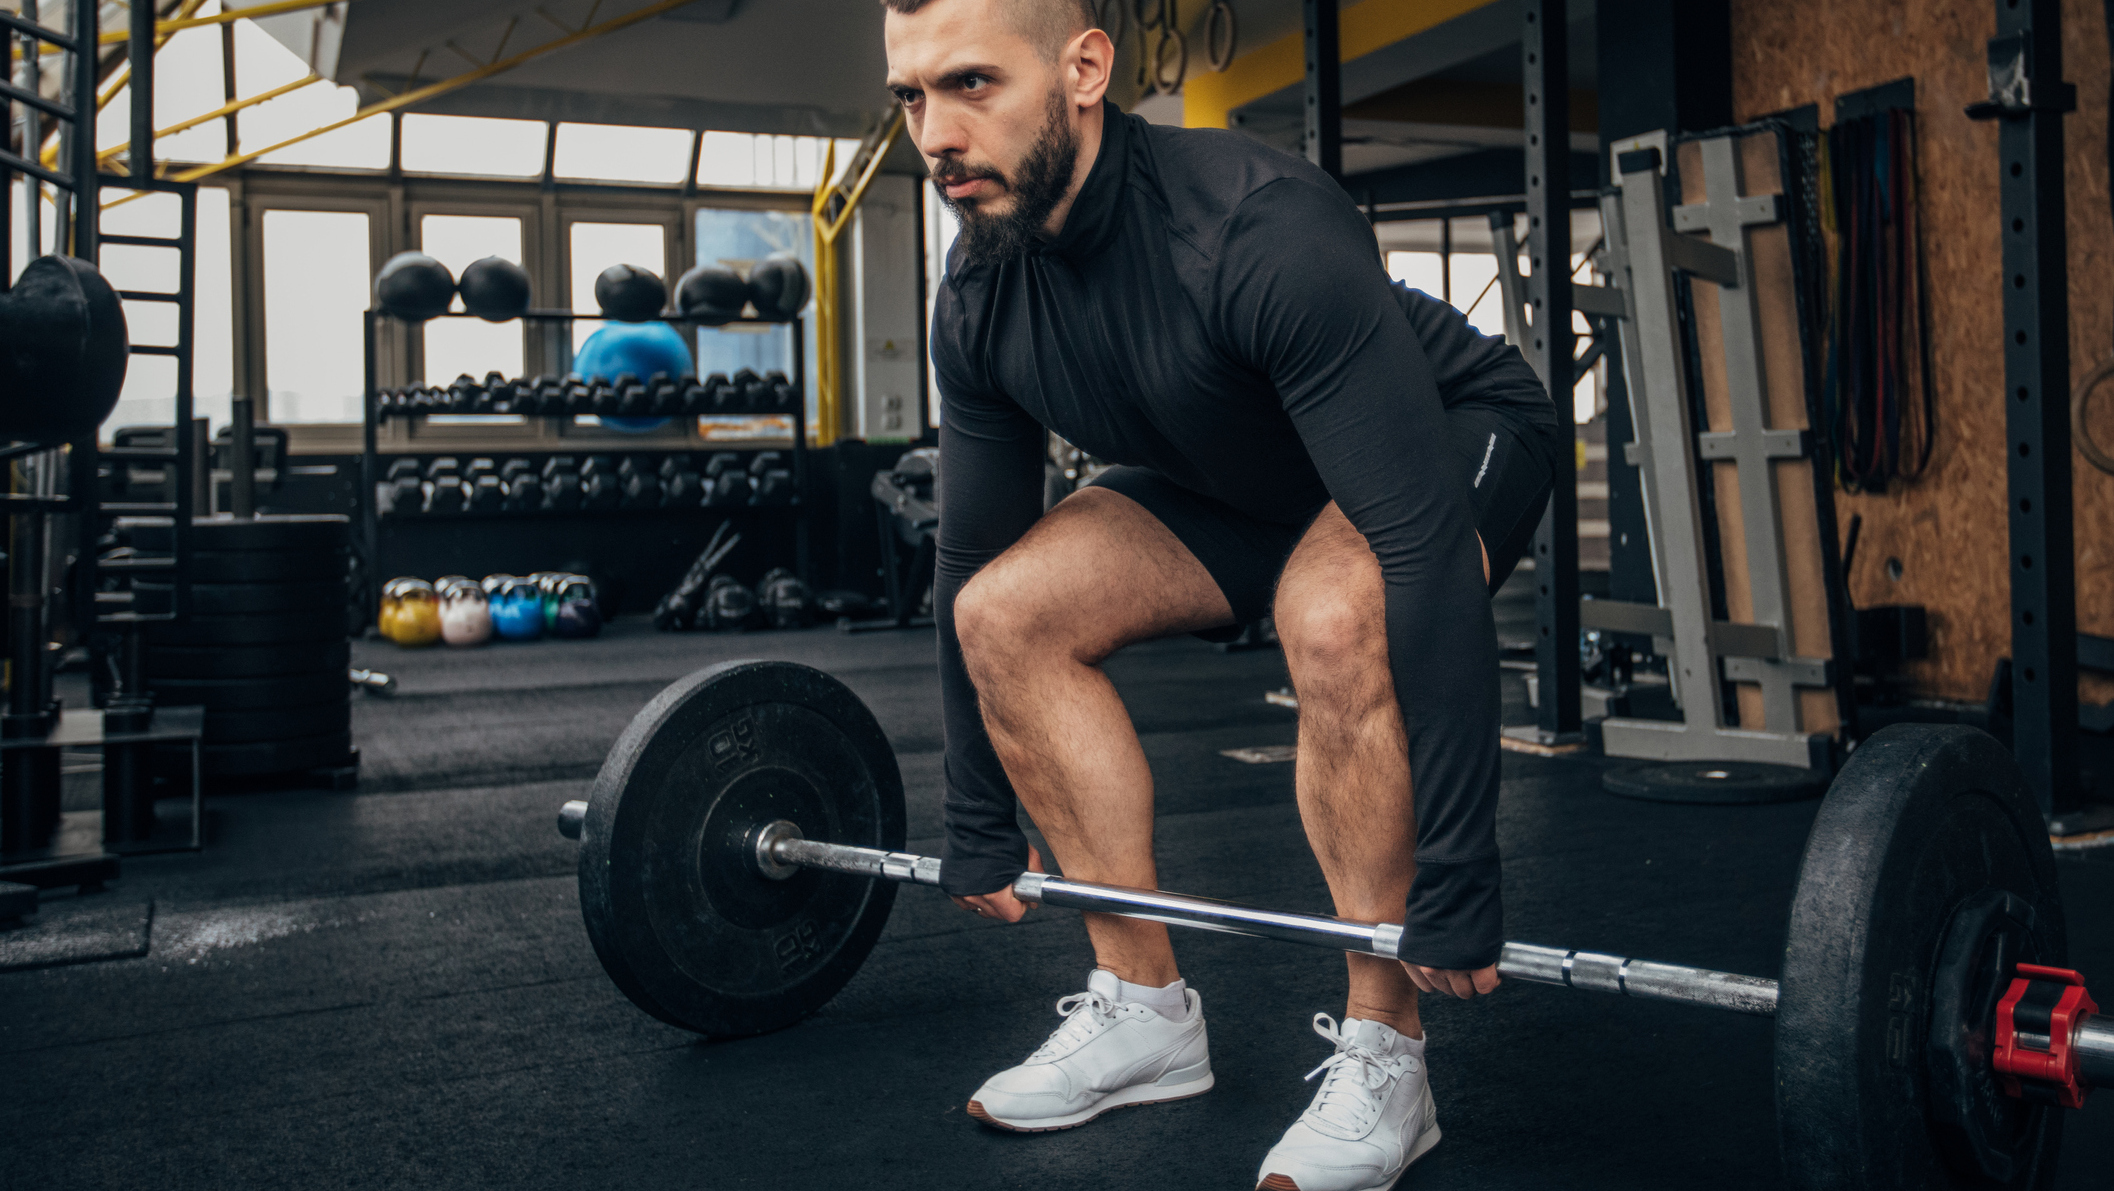 The Leg Workout To Build Bigger Legs Fast